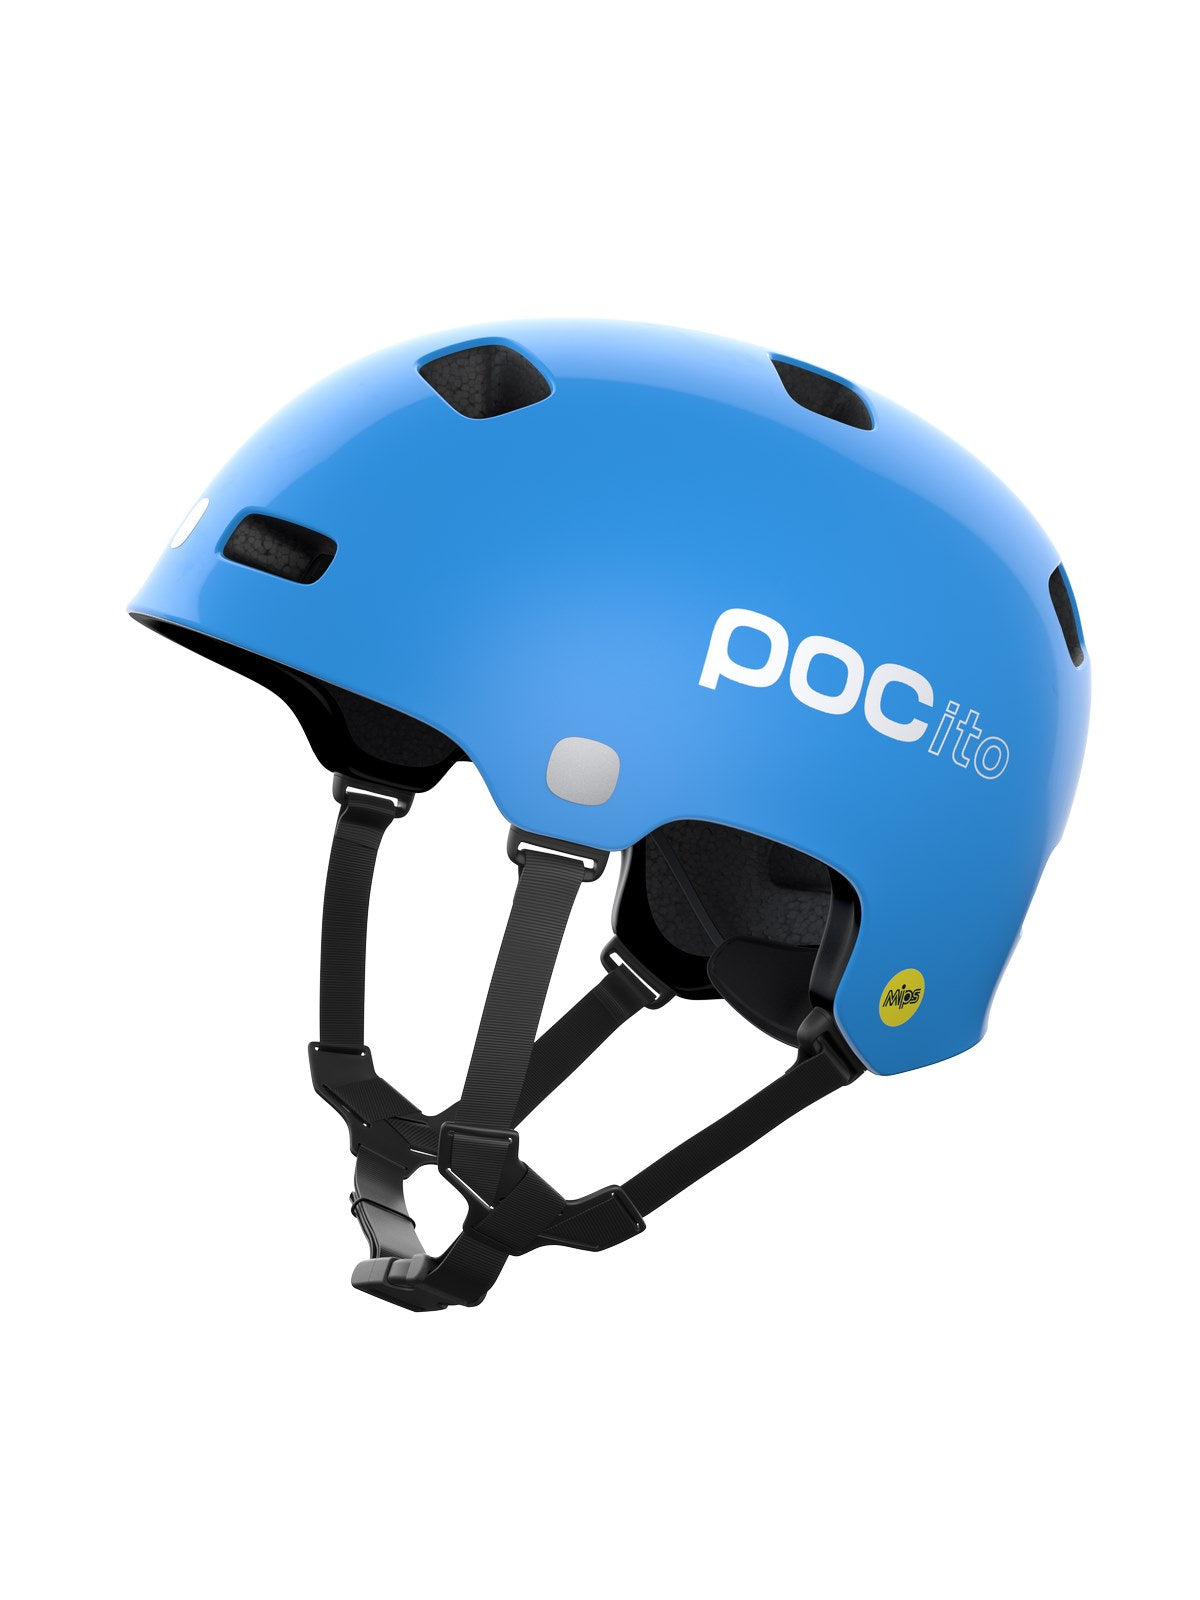 Kask rowerowy POCito Crane MIPS - Fluo. Blue